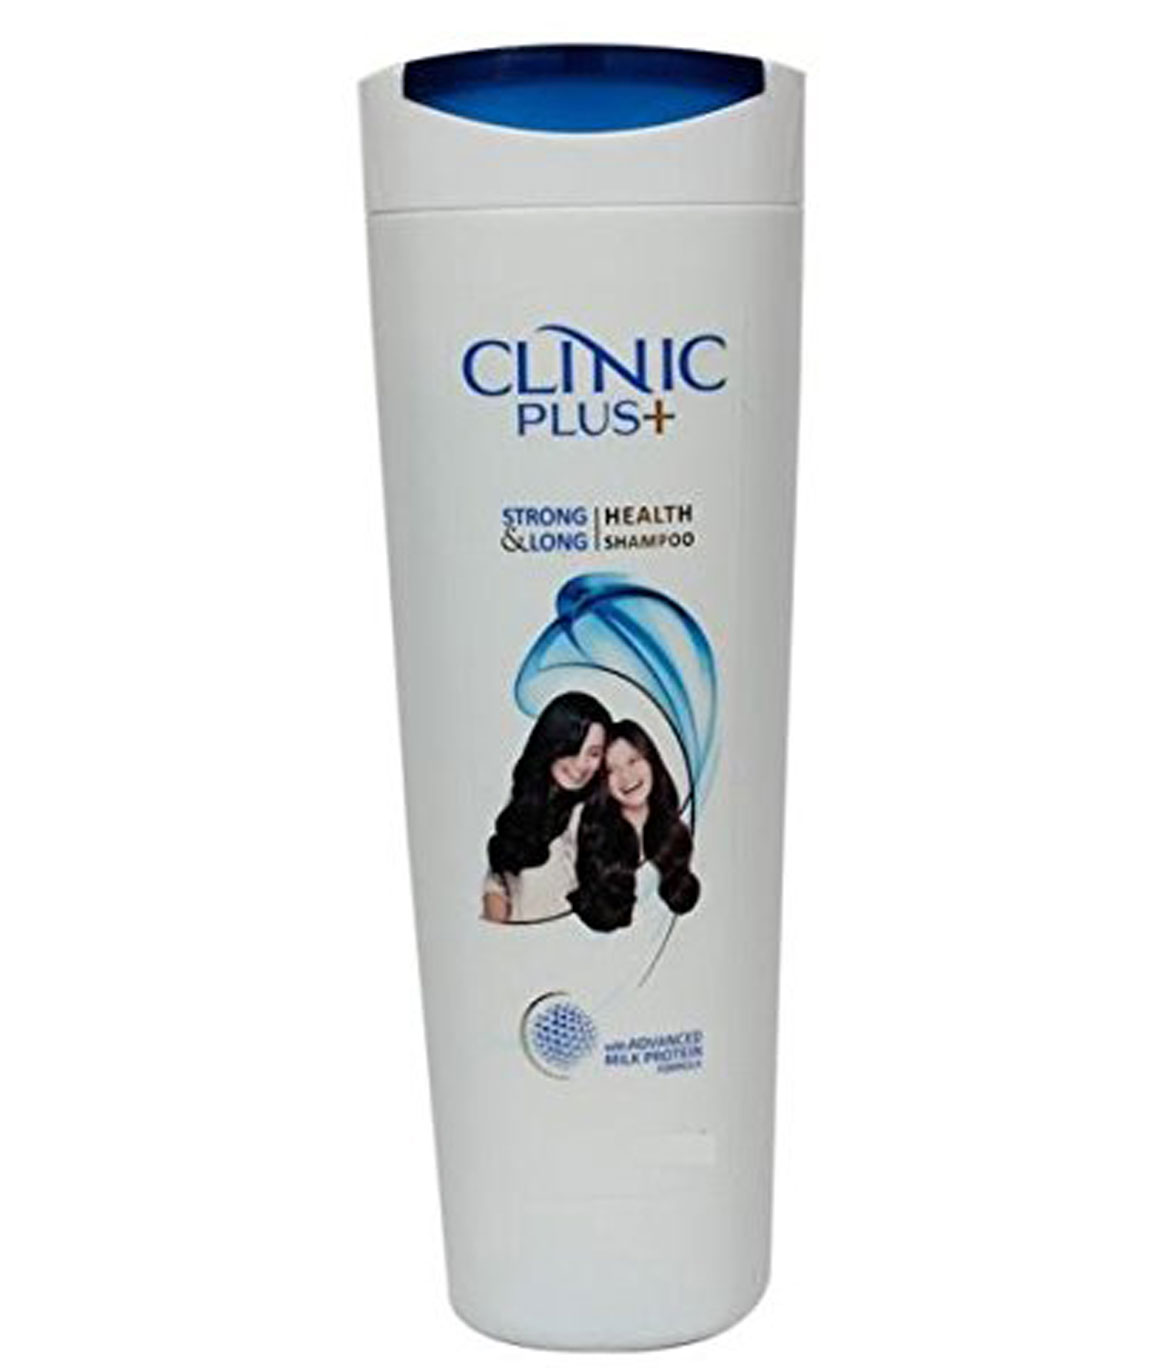 Clinic Plus Strong and Long Health Shampoo, 175ml (Pack of 3)